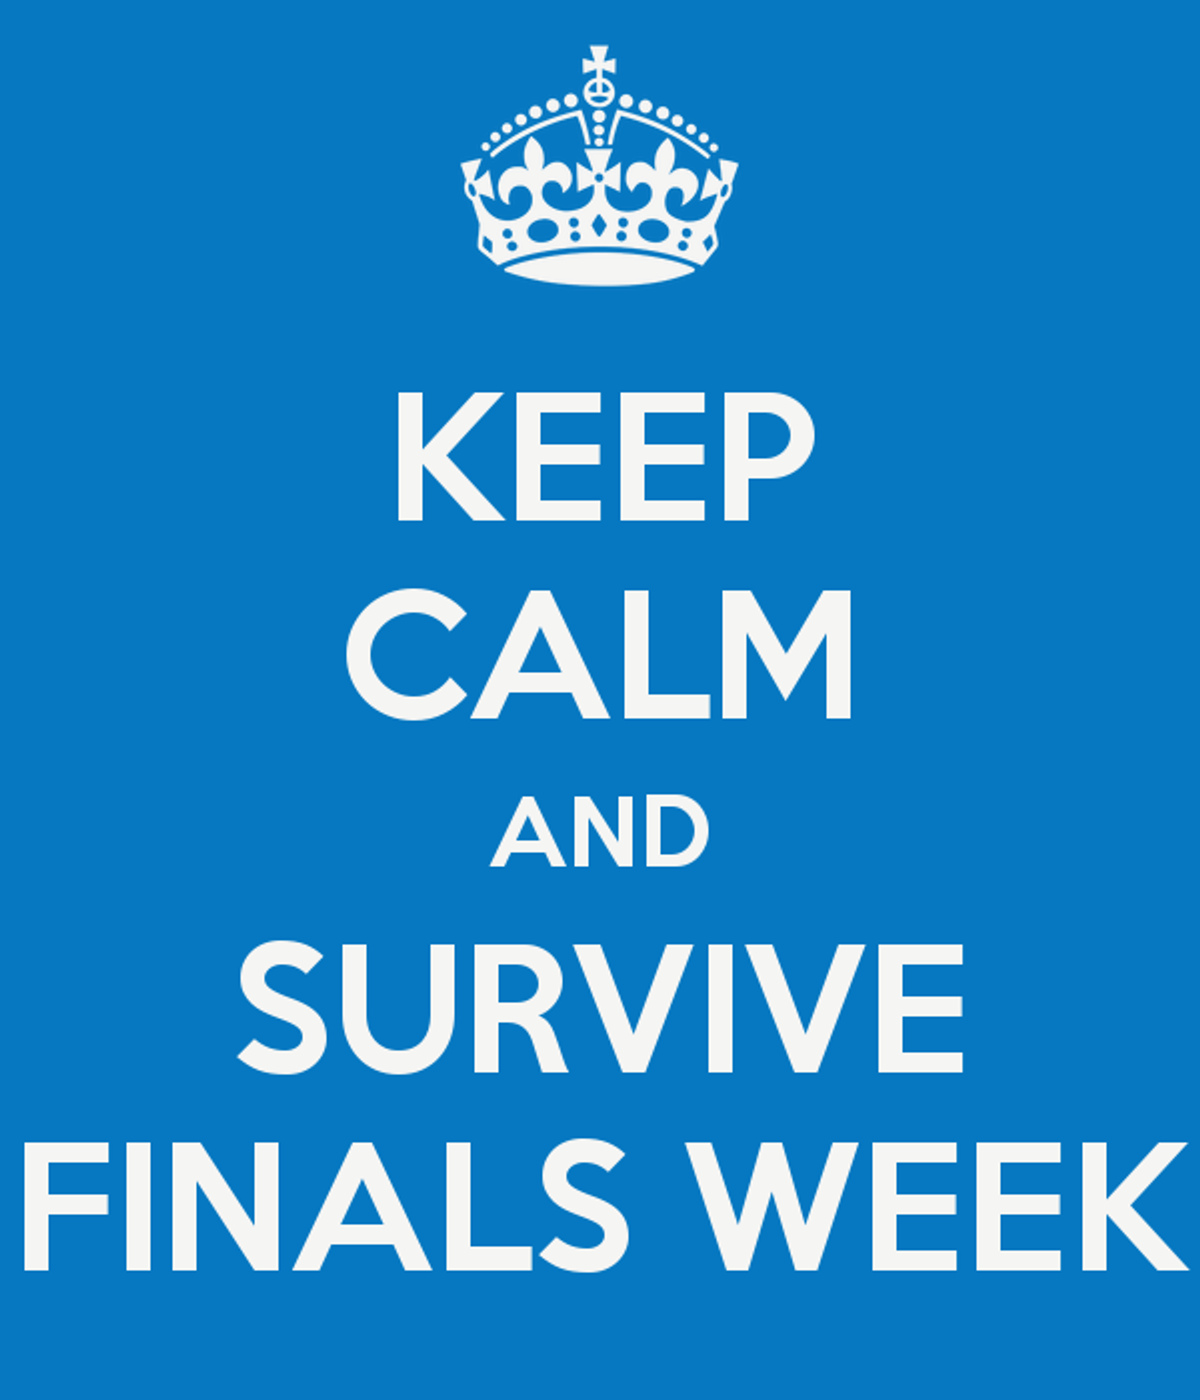 7 Tips That'll Help You Survive Finals Week